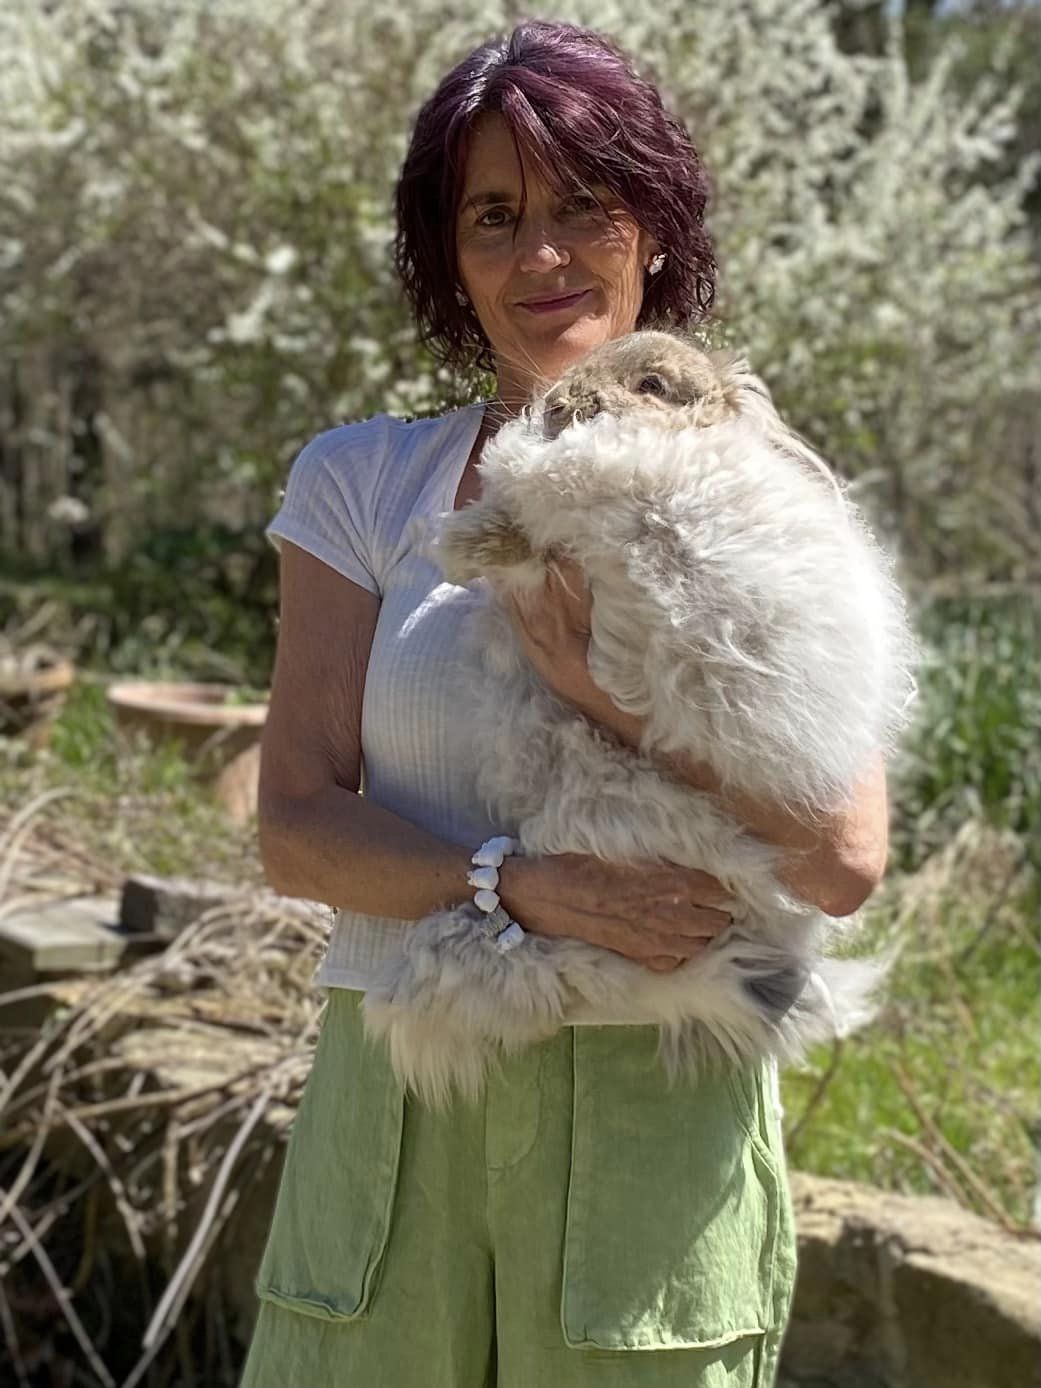 Lisa Moretti of Athens Angoras will teach us about Angora rabbits and the fiber they produce.